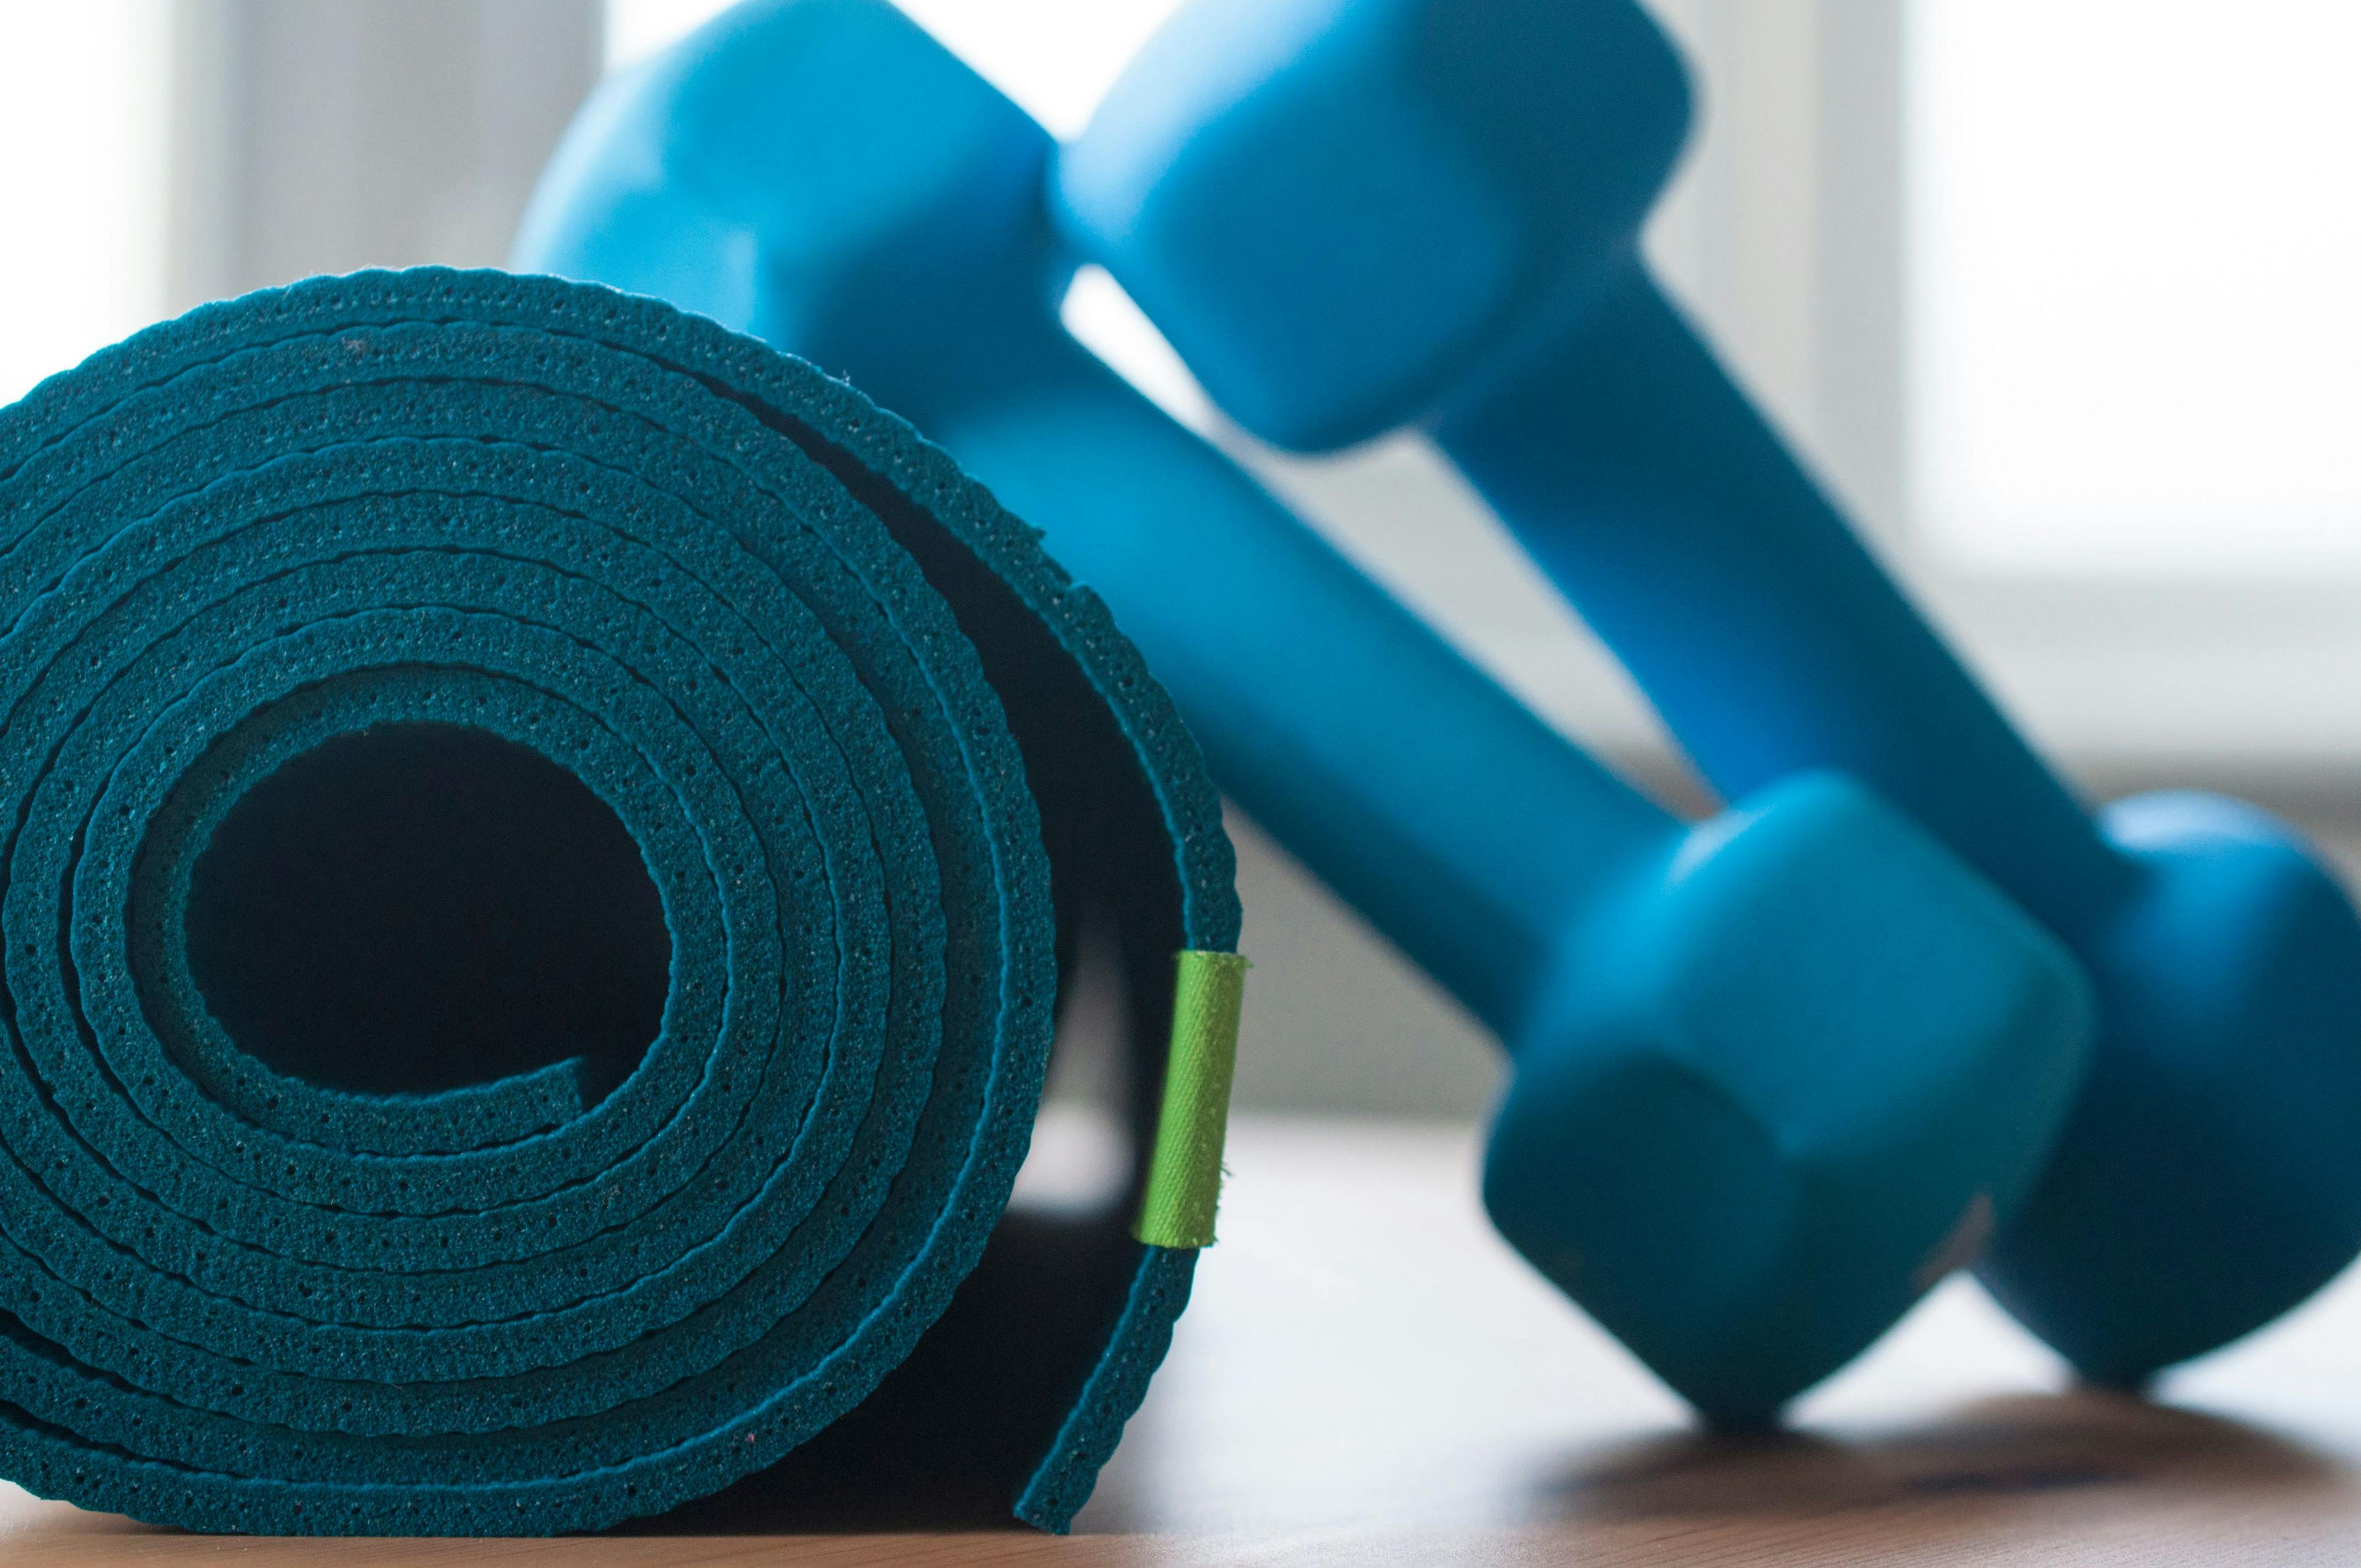 A blue rolled yoga mat. Two blue 2 kg dumbells resting on it. Fitness equipment for home exercise and flexibility training. | Image credit: © Lisa Anastassiu - © stock.adobe.com